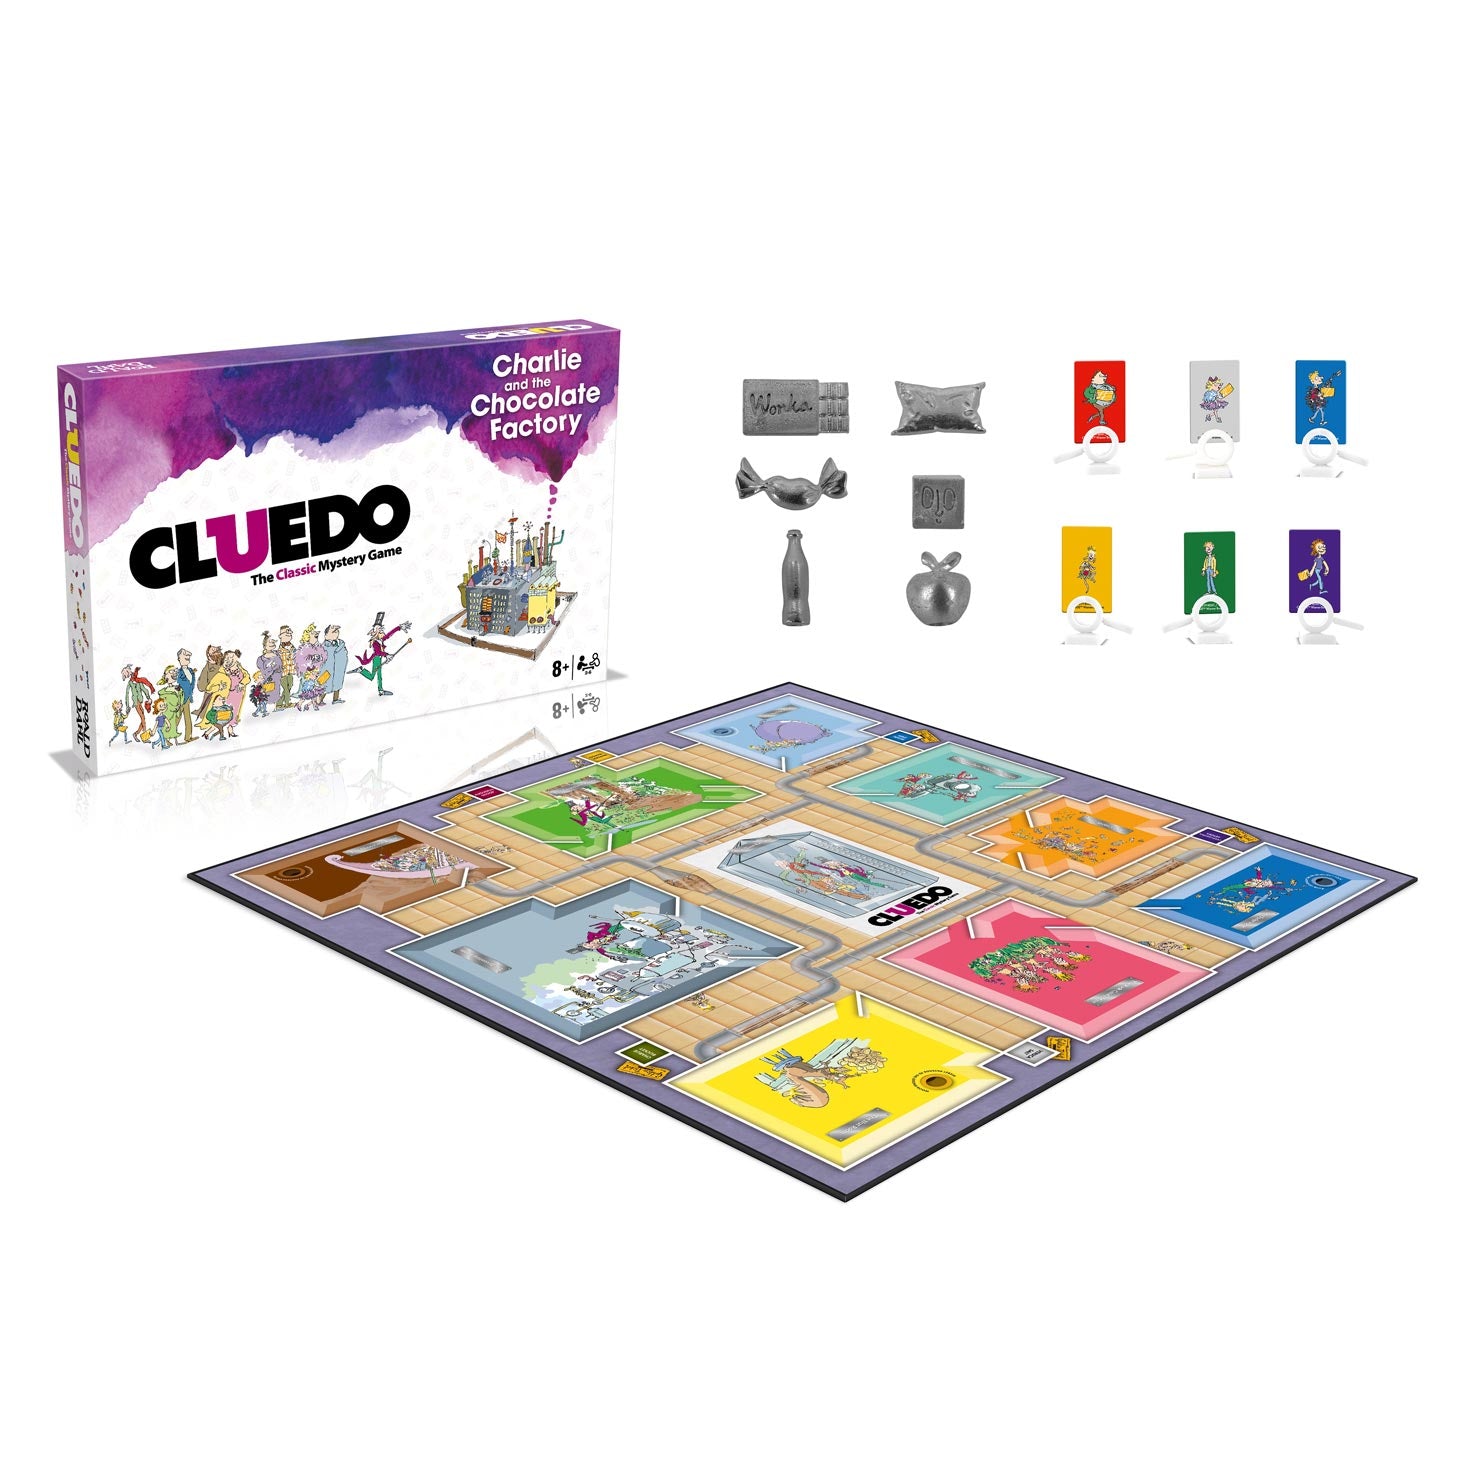 Cluedo board game based on  Charlie and the Chocolate Factory by Roald Dahl and featuring Quentin Blake's illustrations- showing board, character cards and game pieces